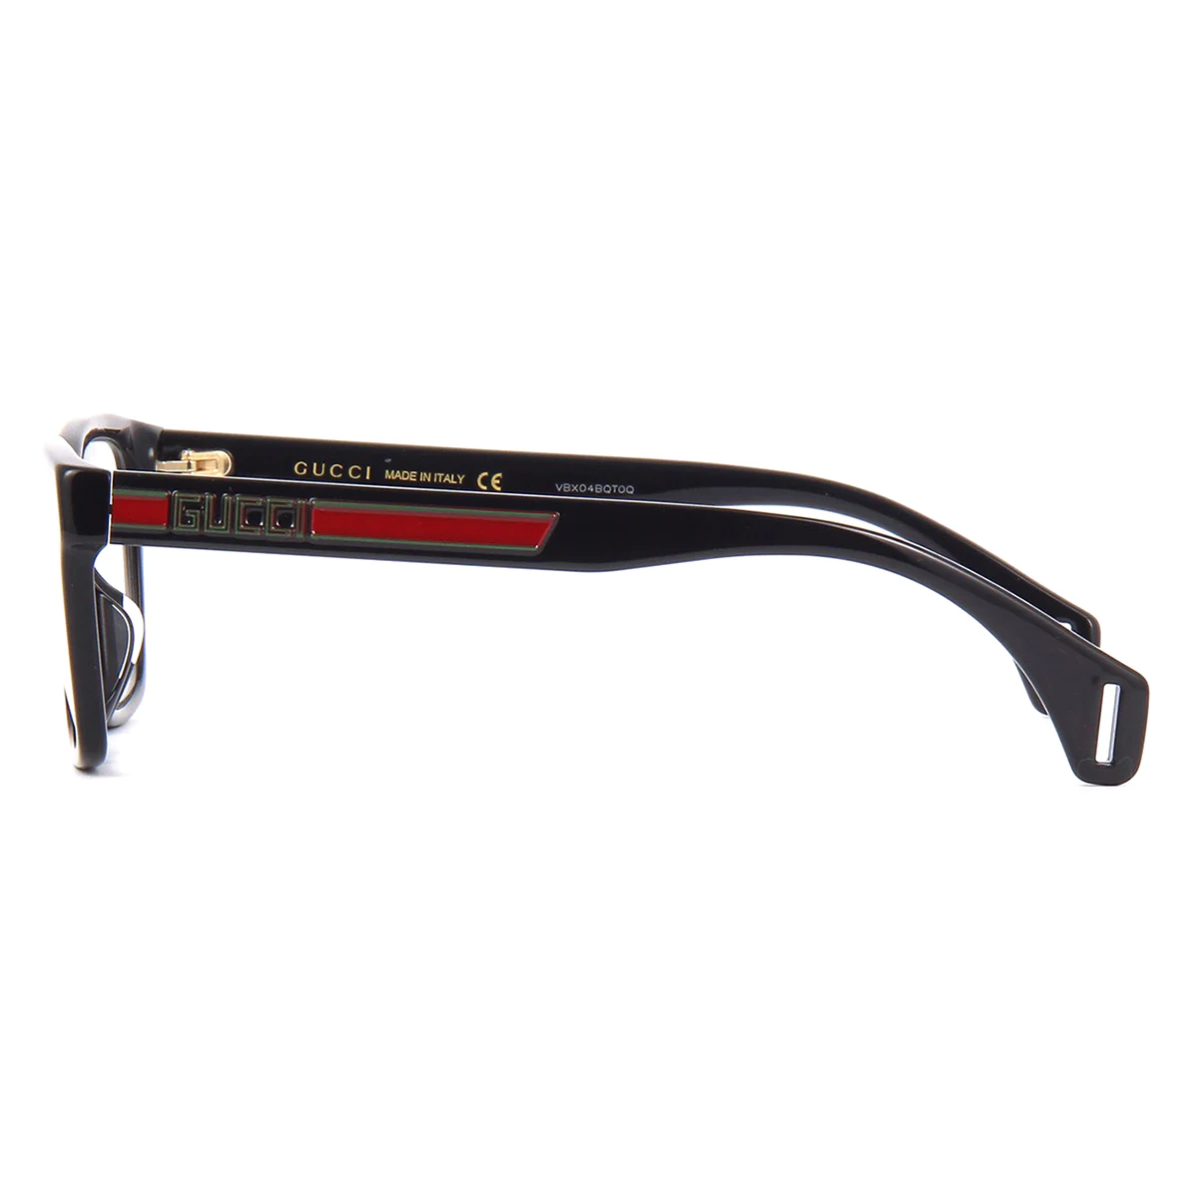 "Premium Gucci Eyewear - Shop now for the iconic Gucci 0466OA spectacle frame at Optorium."